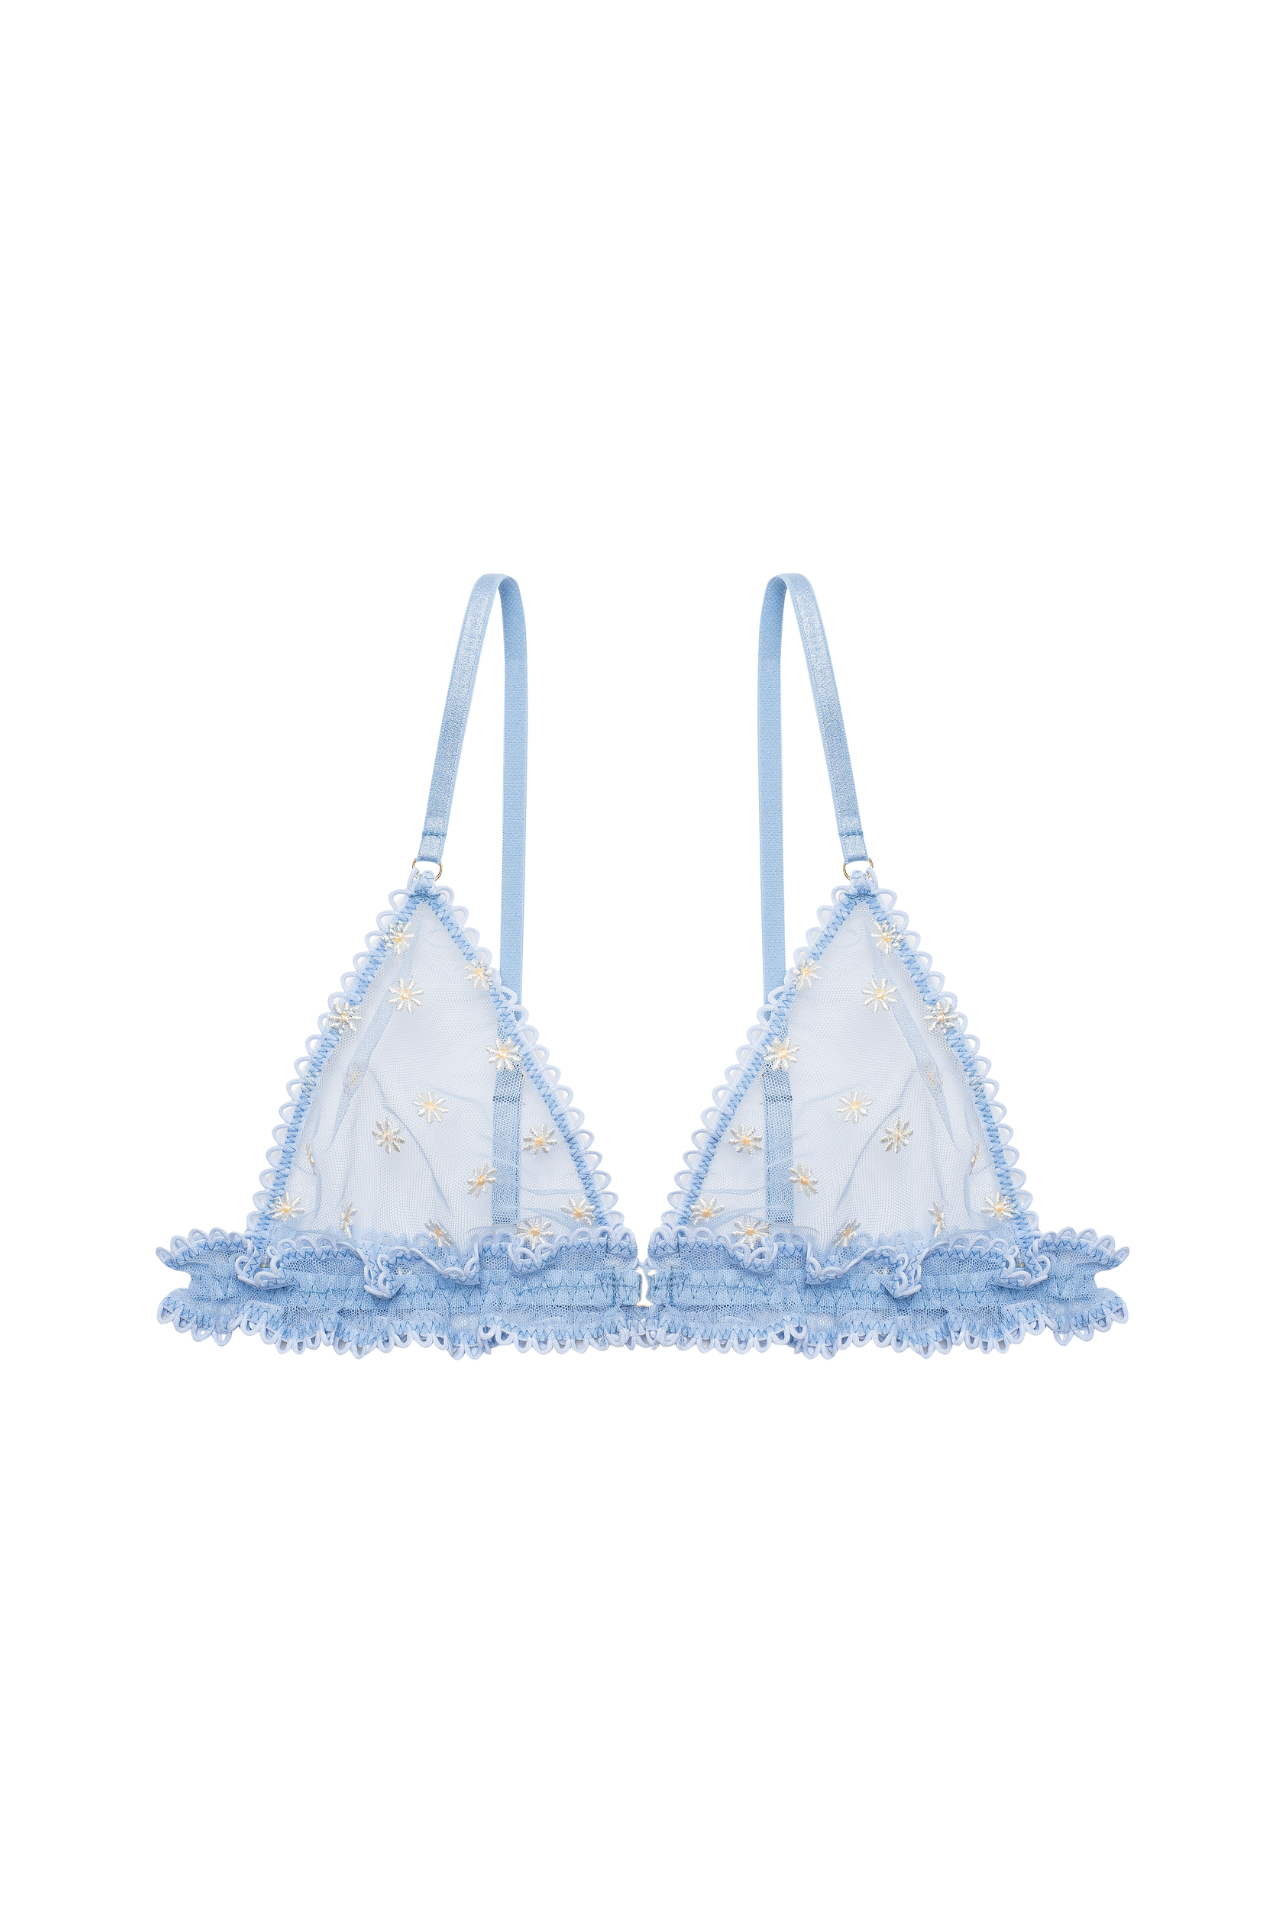 Bleu outremer printed triangle bra with lace